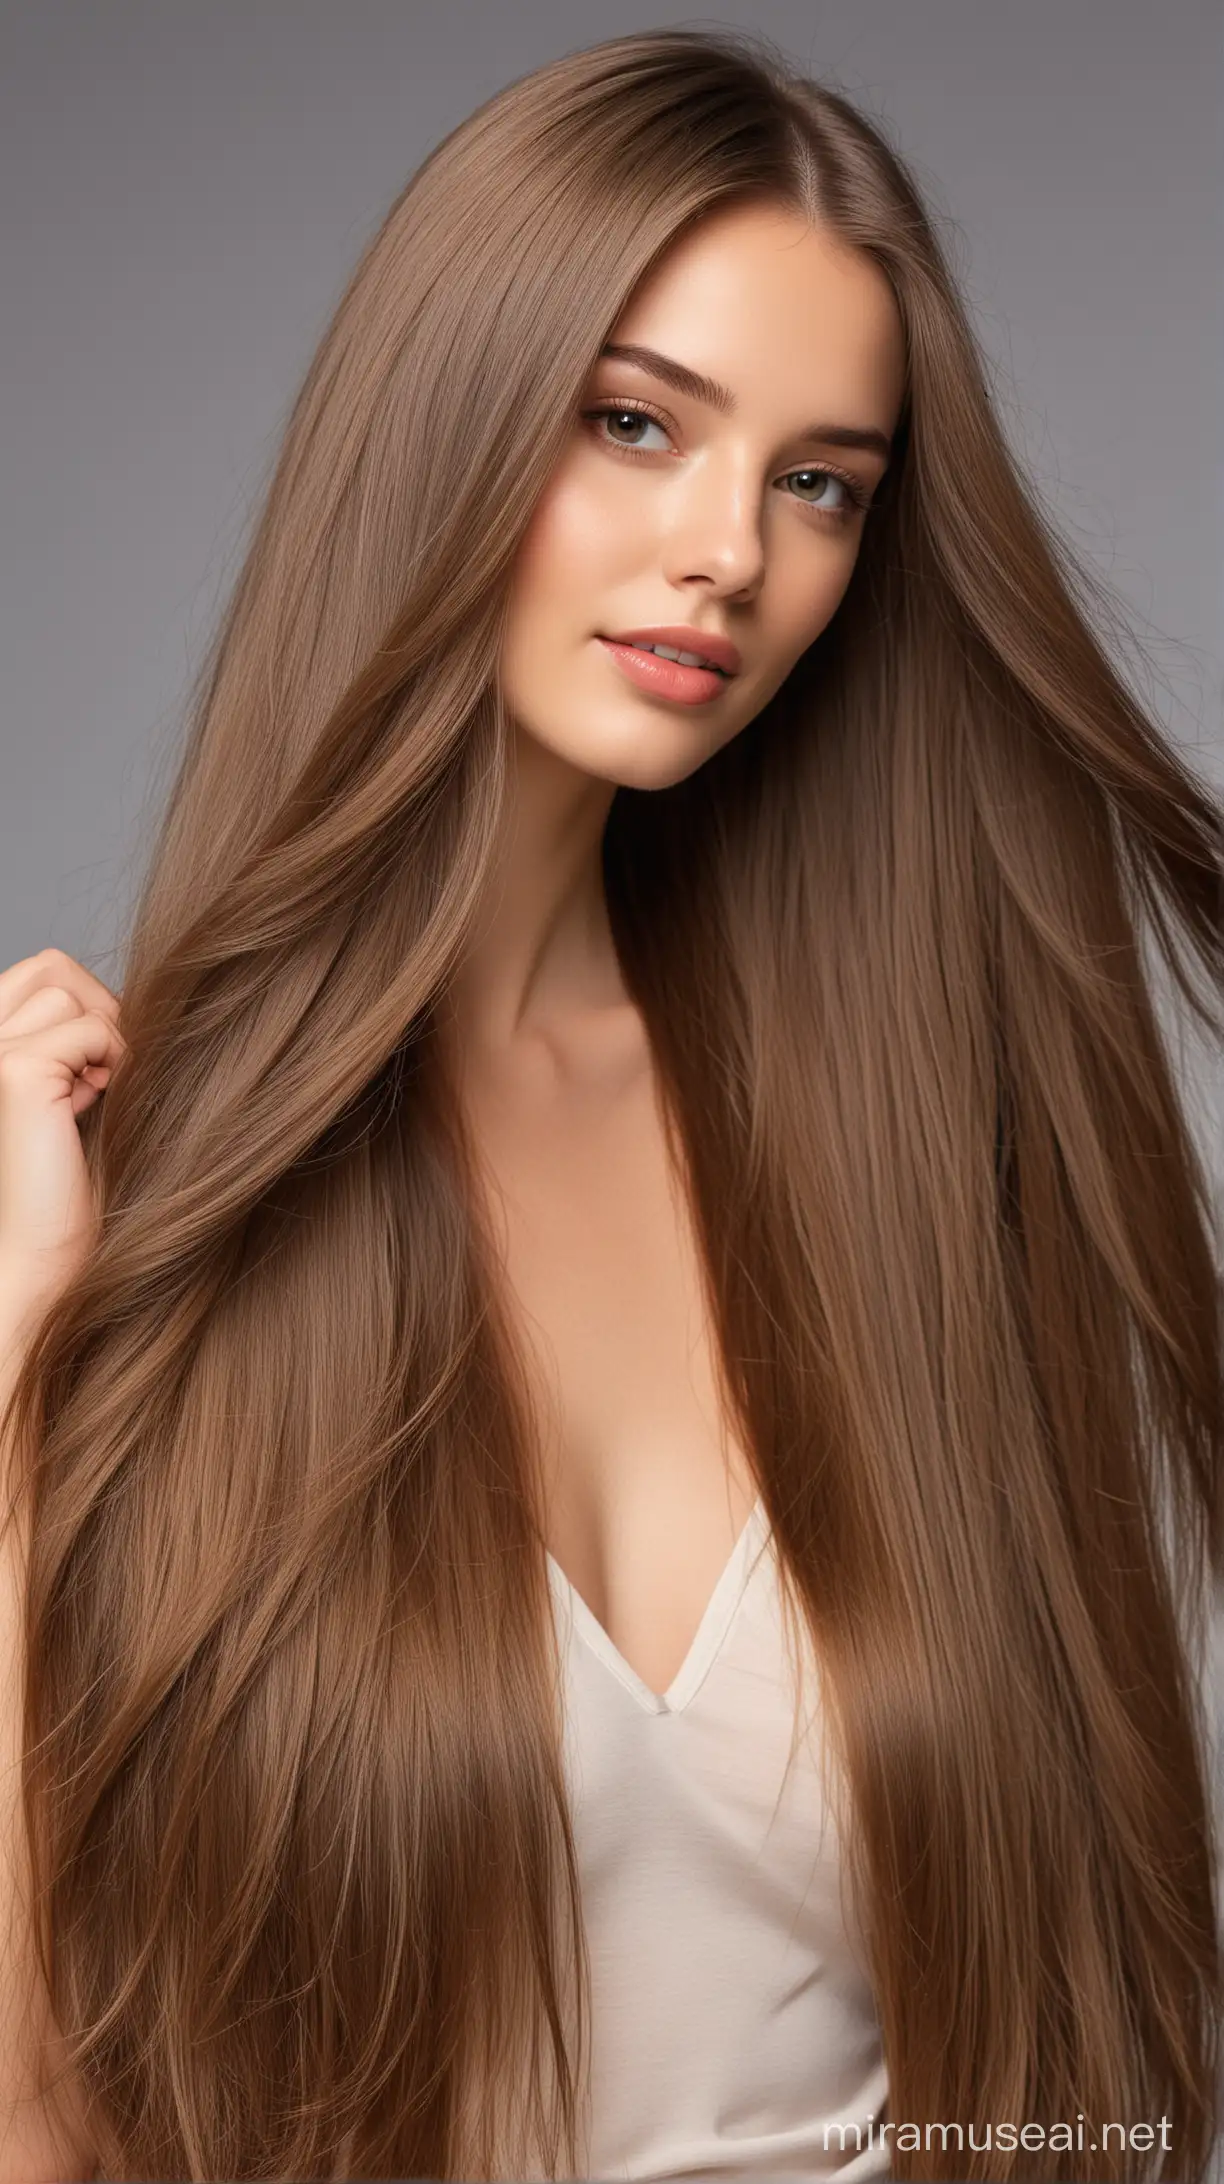 Spectacular model with smooth long hair